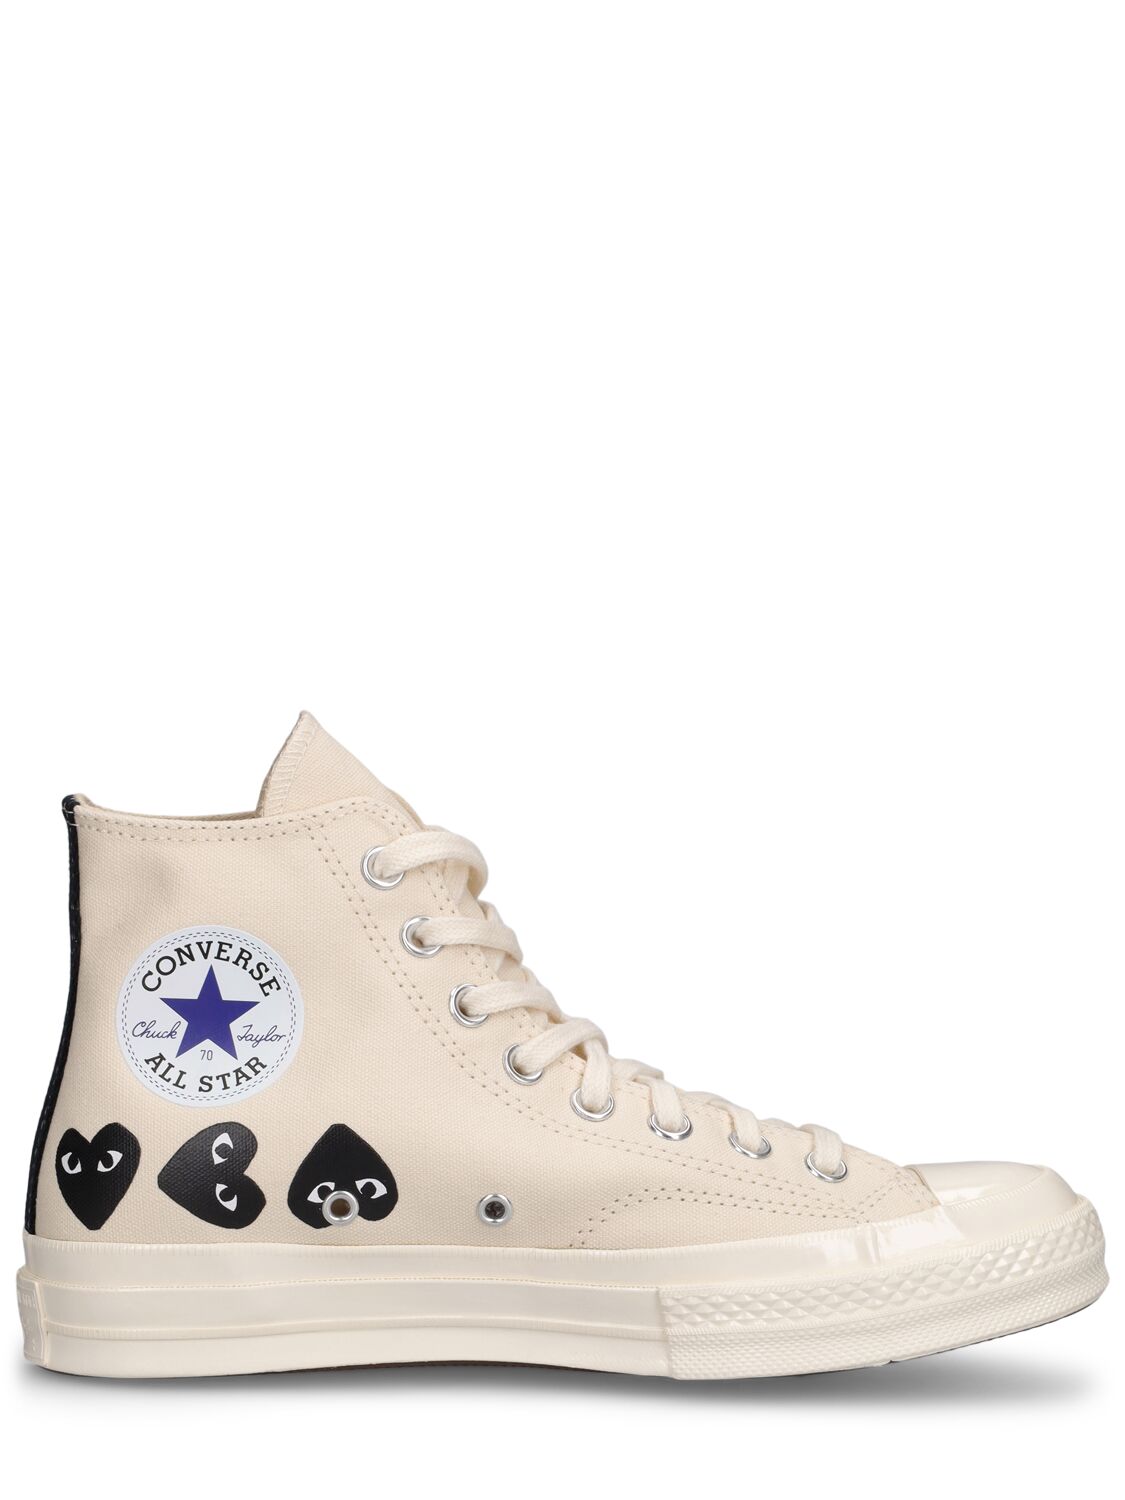 Image of Converse Canvas High Top Sneakers